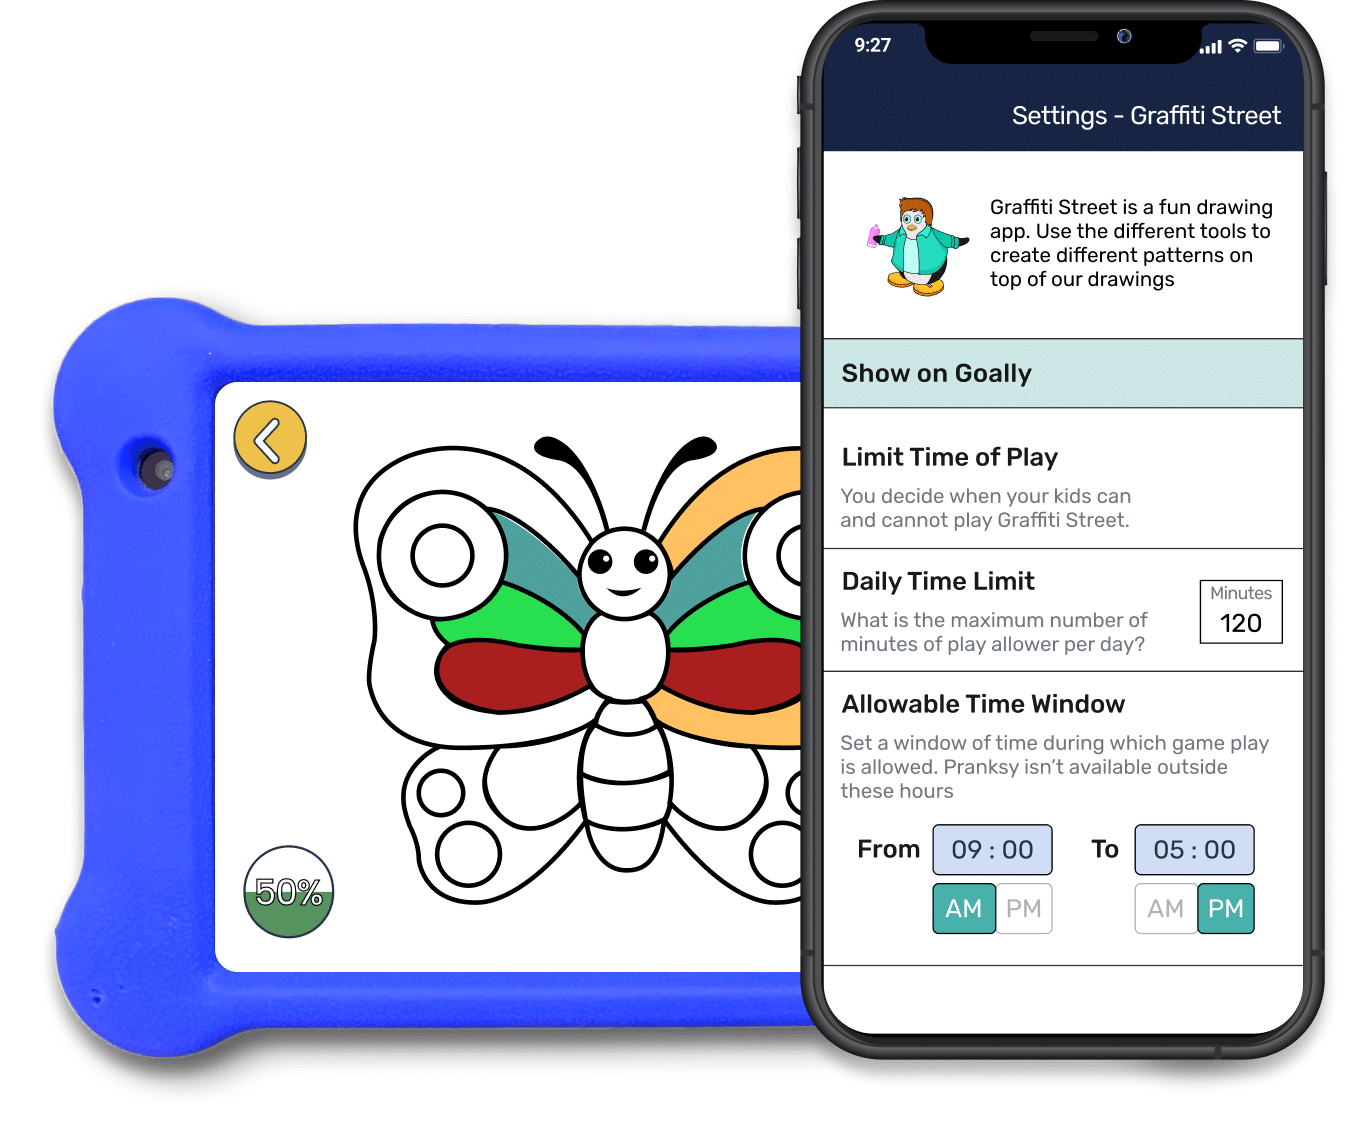 Goally's drawing apps for kids is displaying a butterfly drawing in Graffiti Street. Next to it is the Parent app displaying Graffiti app settings like a daily time limit and time window.